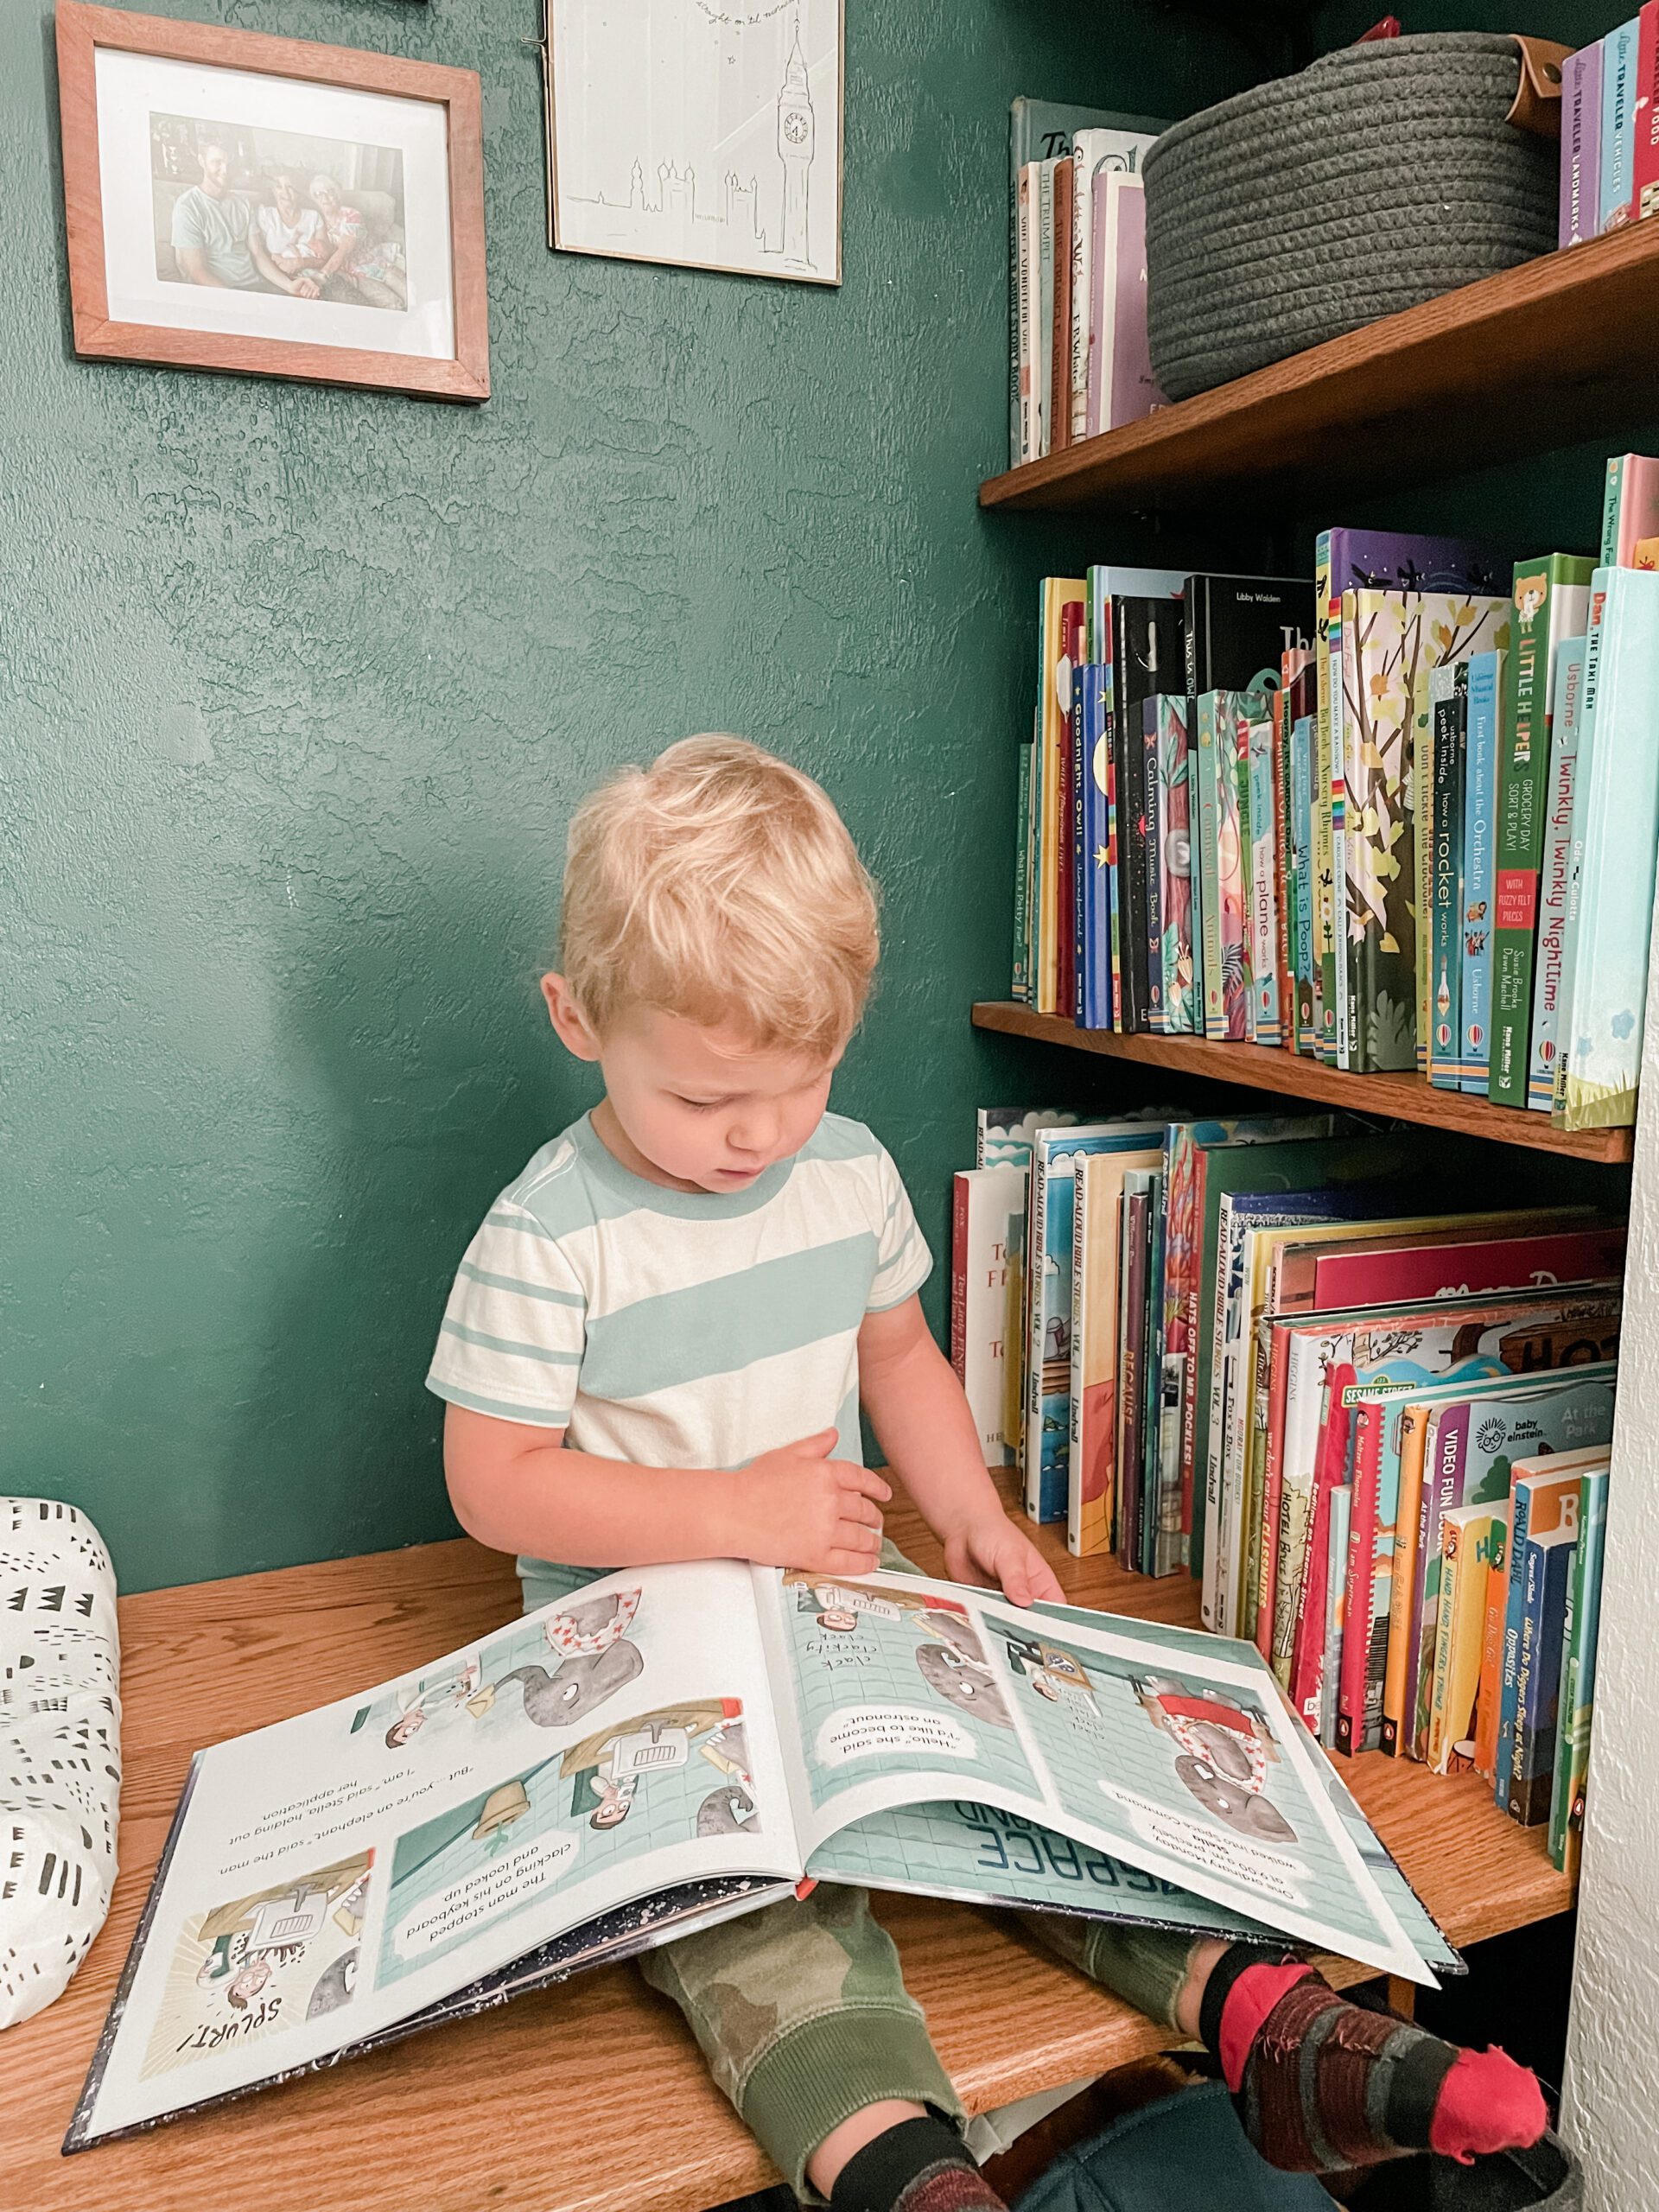 Little boy reading inside of closet area converted into a reading nook. He is sitting on a bench with a book on his lap. Shelves filled with books are behind him.